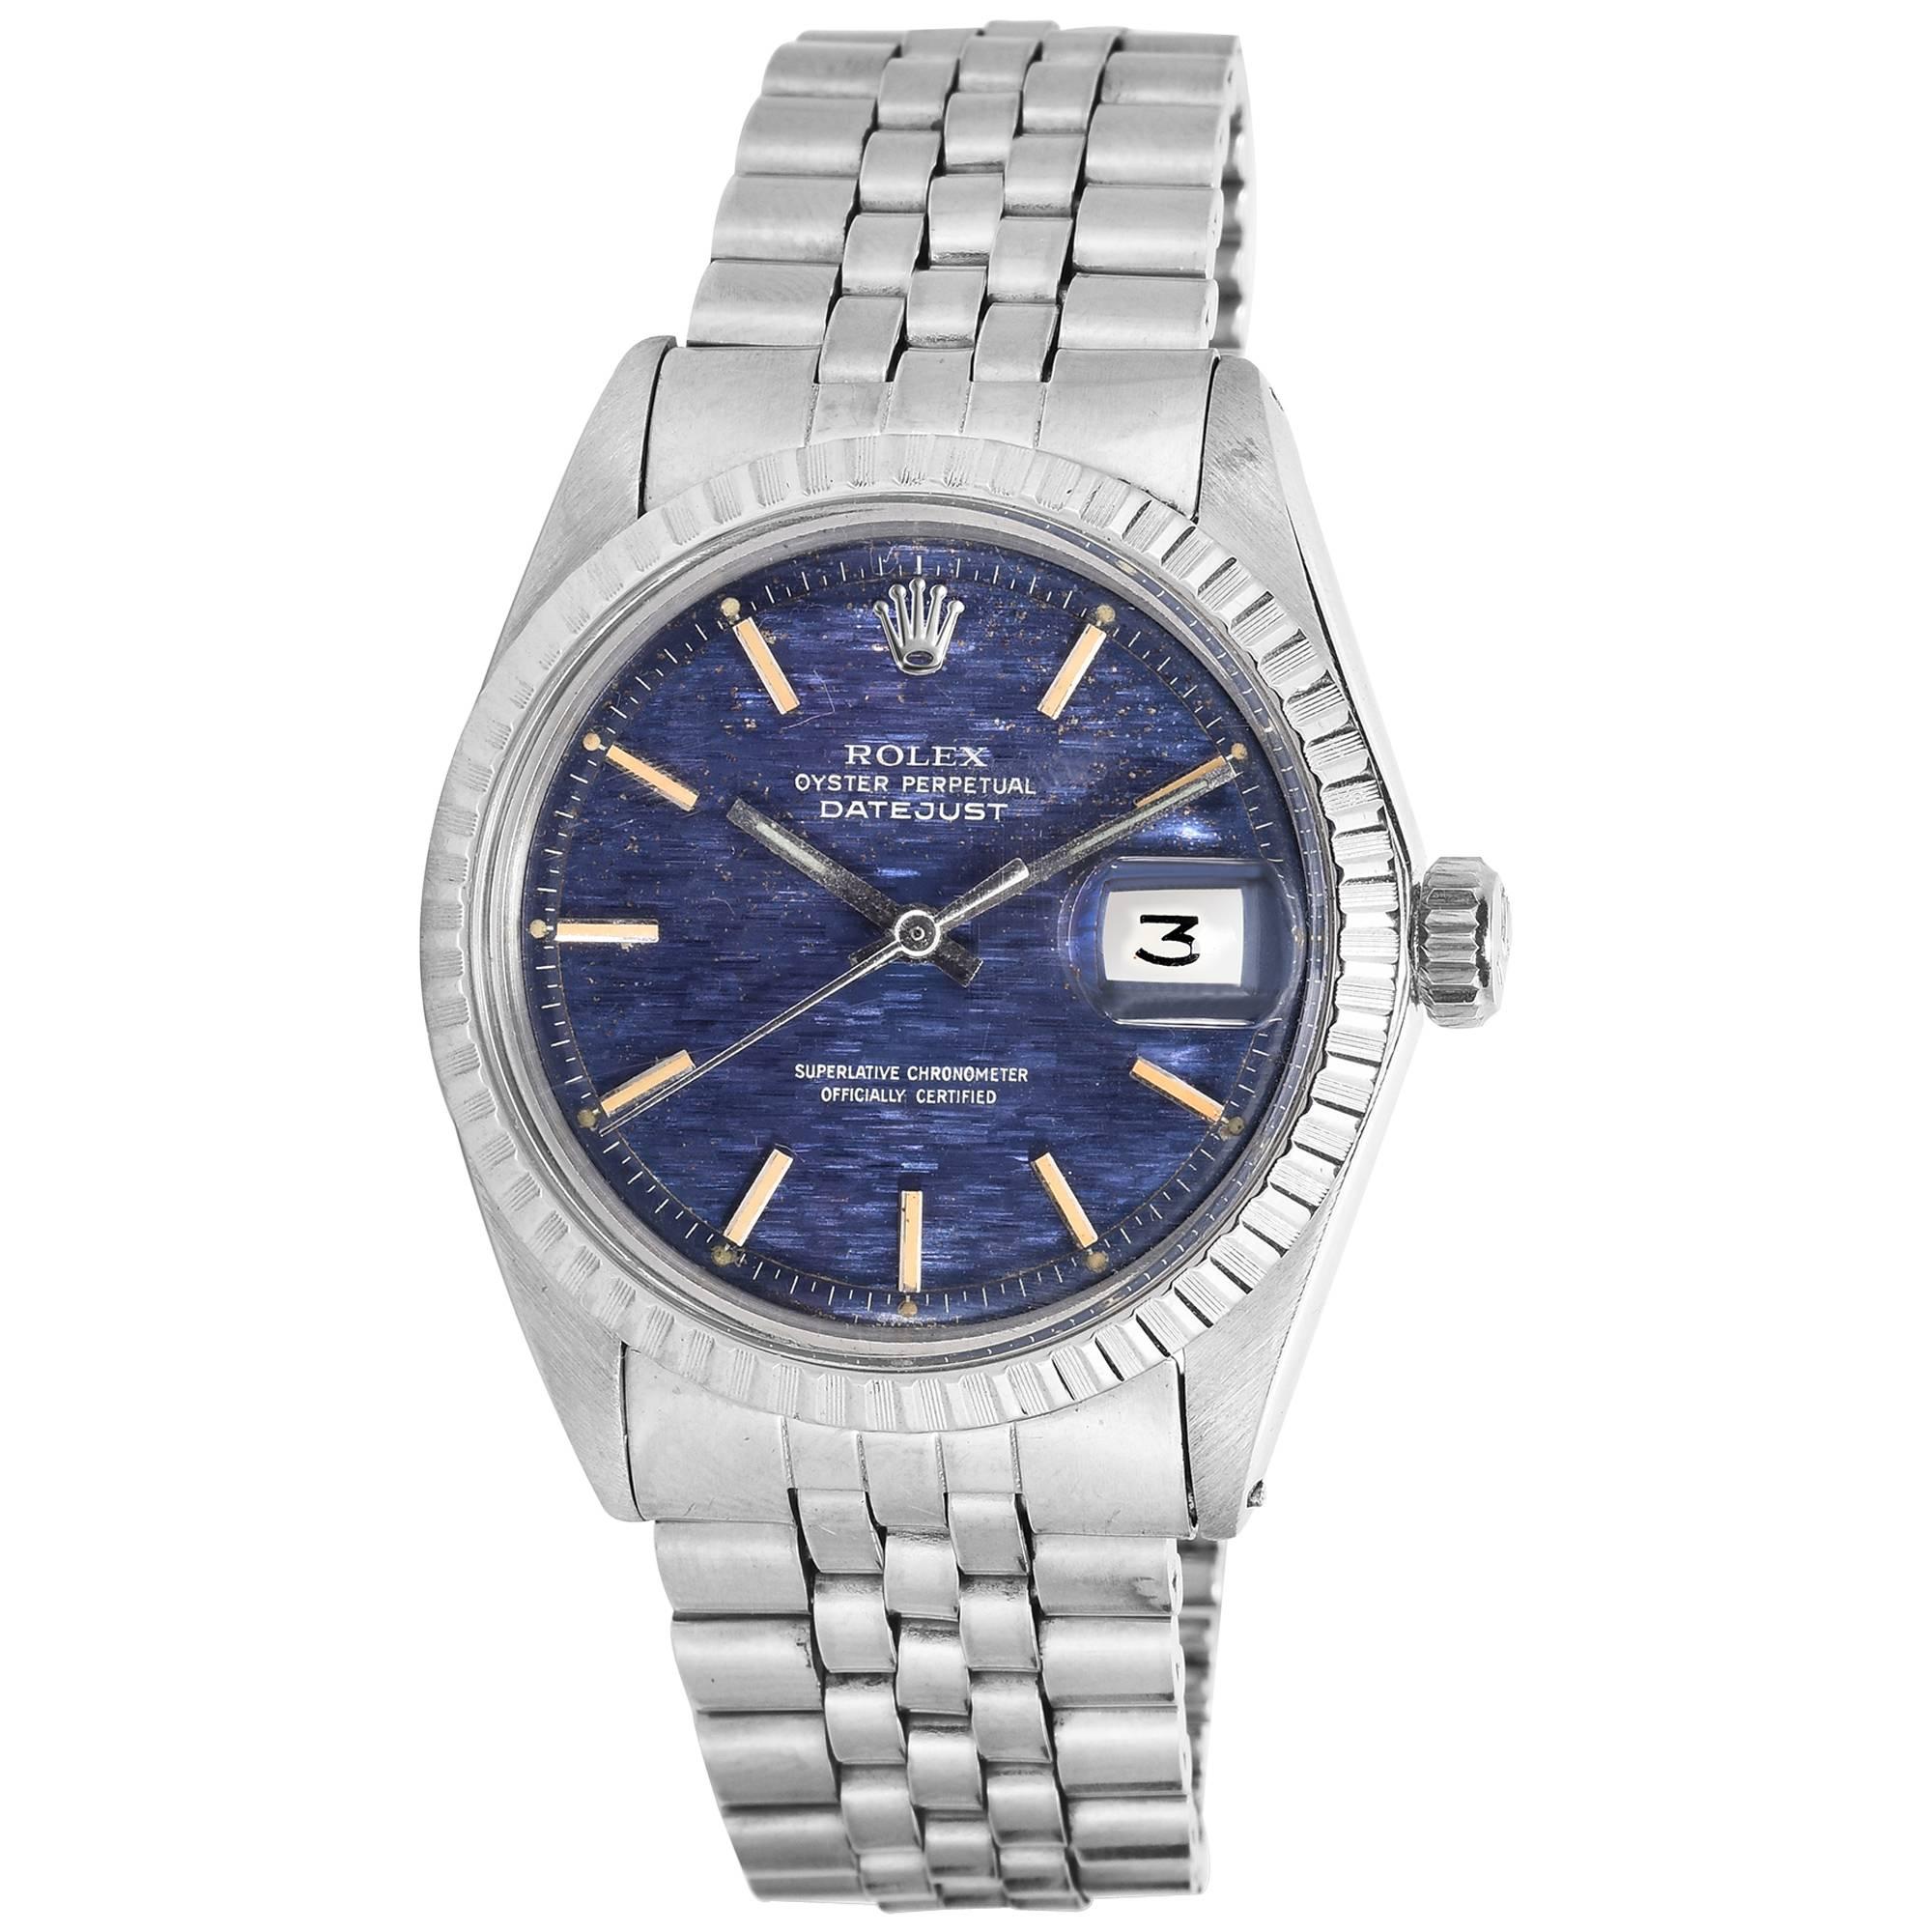 Rolex Oyster Perpetual Datejust Blue Wave Dial Wristwatch 1970